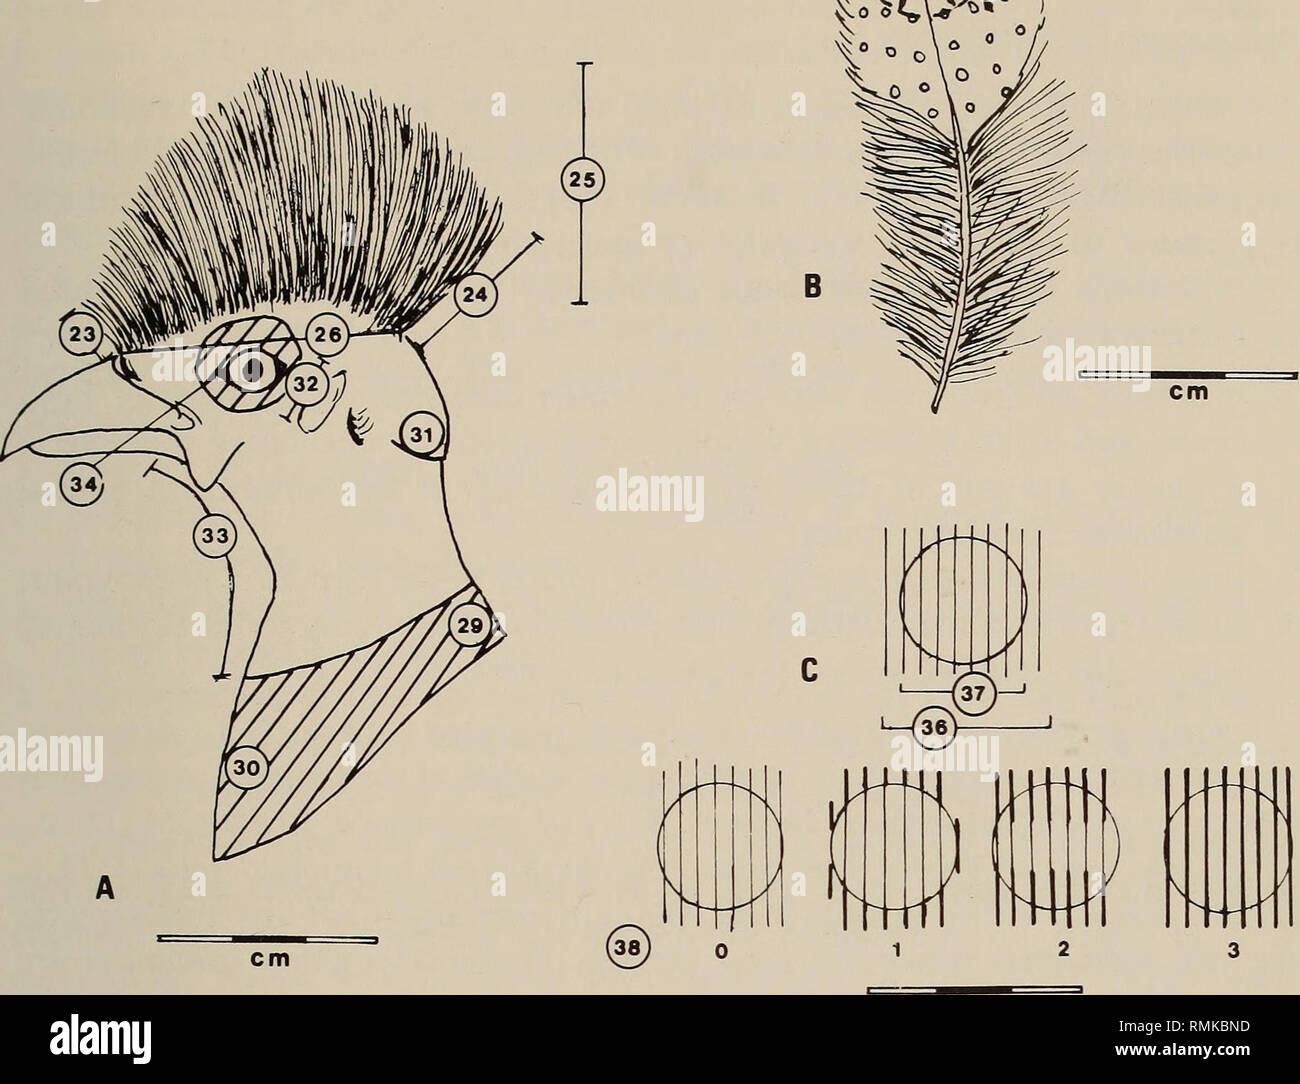 . Annals of the South African Museum = Annale van die Suid-Afrikaanse Museum. Natural history. THE EVOLUTION OF GUINEA-FOWL 49. Fig. 4. Quantitative characters 22-26, 29-39. A. Lateral view of head, neck and collar of Guttera plumifera. B. Mid-dorsal feather of G. pucherani edouardi. C. Spots on mid-dorsal feathers of Guttera spp. detrimental to the understanding of geographic variation and intra-specific evolution. These critics maintain that: 1. characters used to delineate subspecies usually have patterns of geographic variation which are discordant with each other and with the distribution Stock Photo